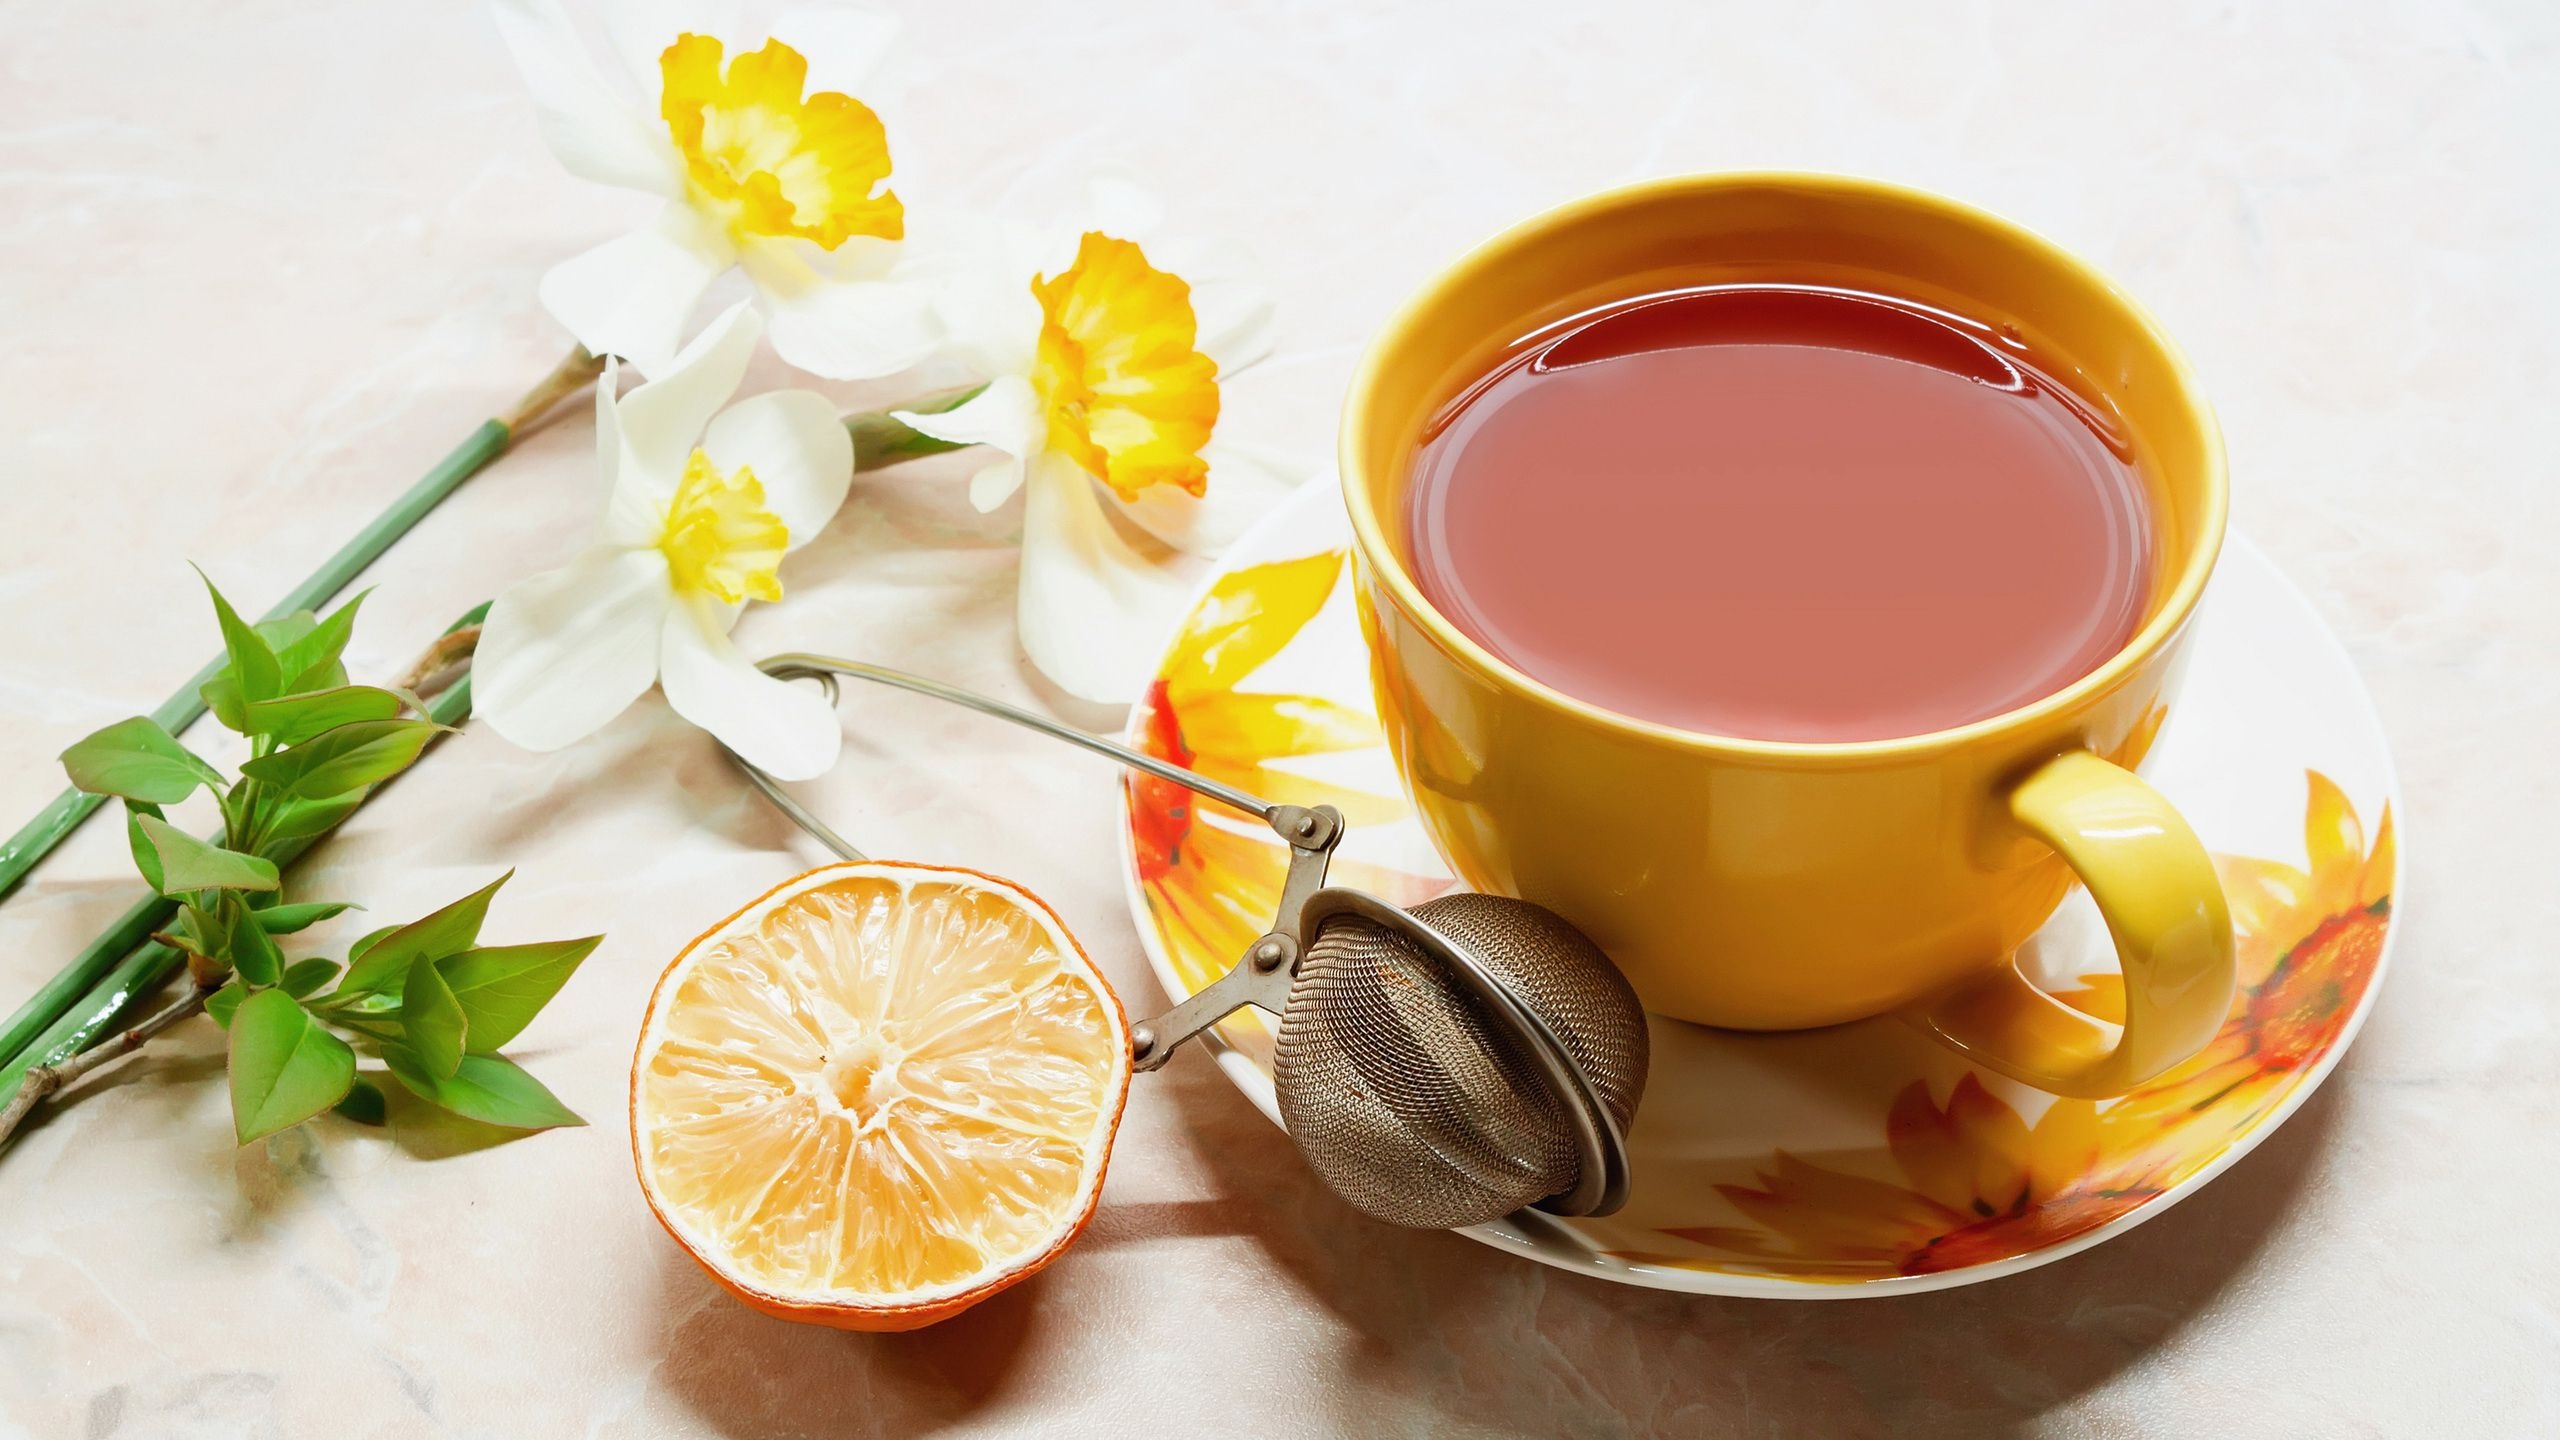 Tea: Herbal teas, Beverages made from the infusion or decoction of herbs, spices. 2560x1440 HD Wallpaper.